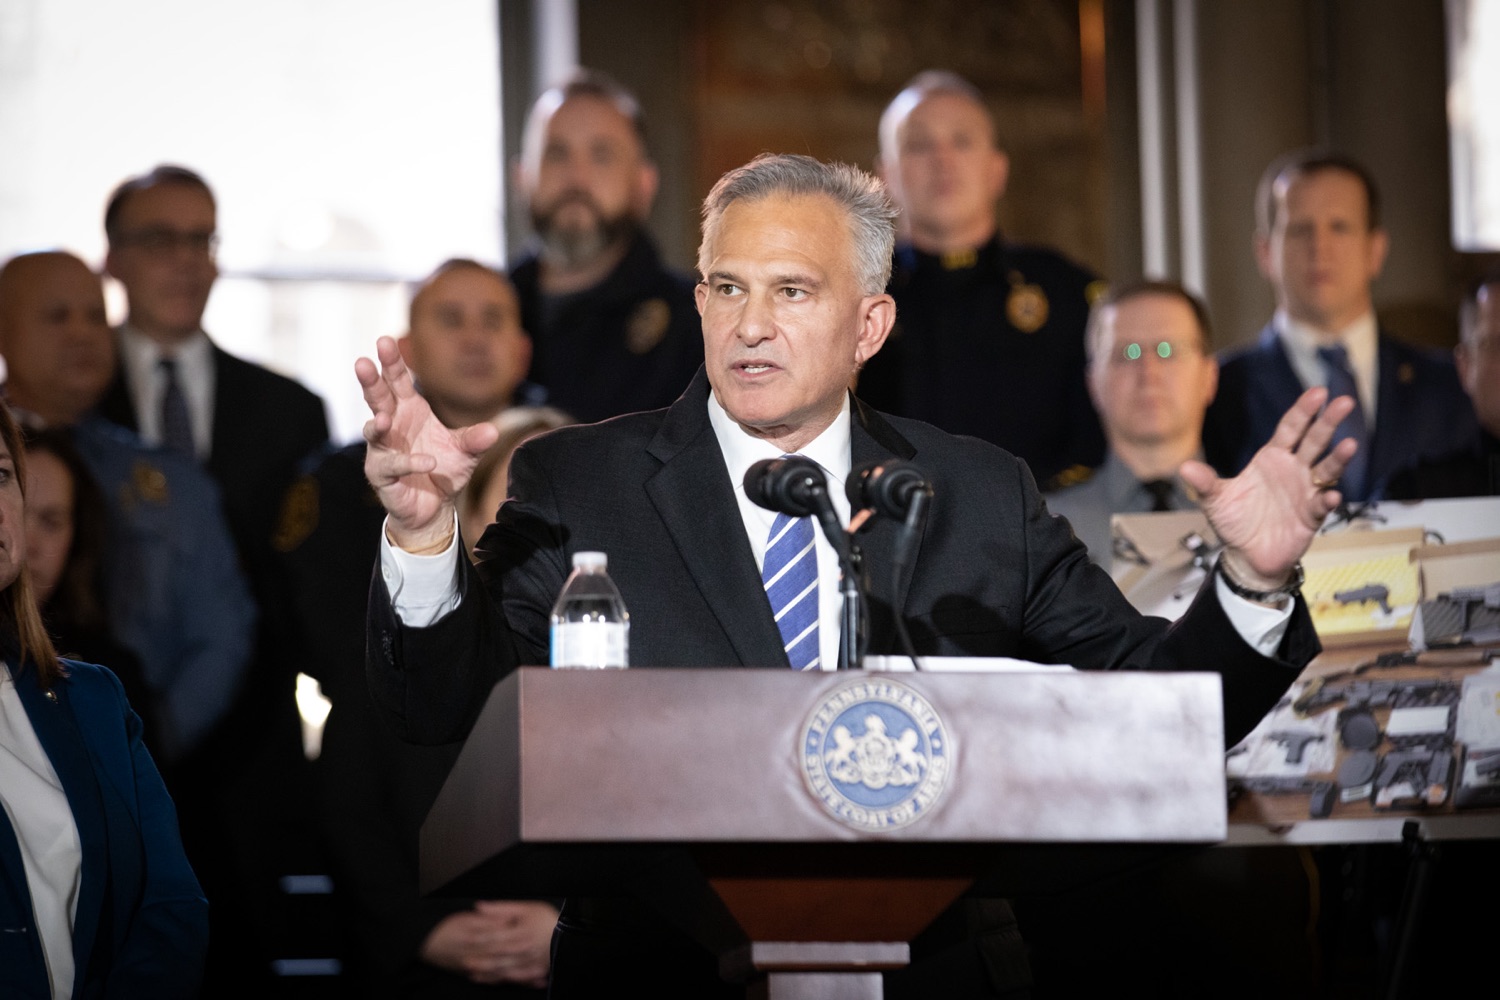 Pennsylvania Attorney General Michelle Henry and Allegheny County District Attorney Stephen Zappala were joined by law enforcement and community collaborators to announce a new public safety initiative in Allegheny County. Pictured here is Stephen Zappala, Allegheny County District Attorney, delivering remarks during the event. Pittsburgh, Pennsylvania.<br><a href="https://filesource.amperwave.net/commonwealthofpa/photo/24297_oag_publicSafety_JAP_10.jpg" target="_blank">⇣ Download Photo</a>